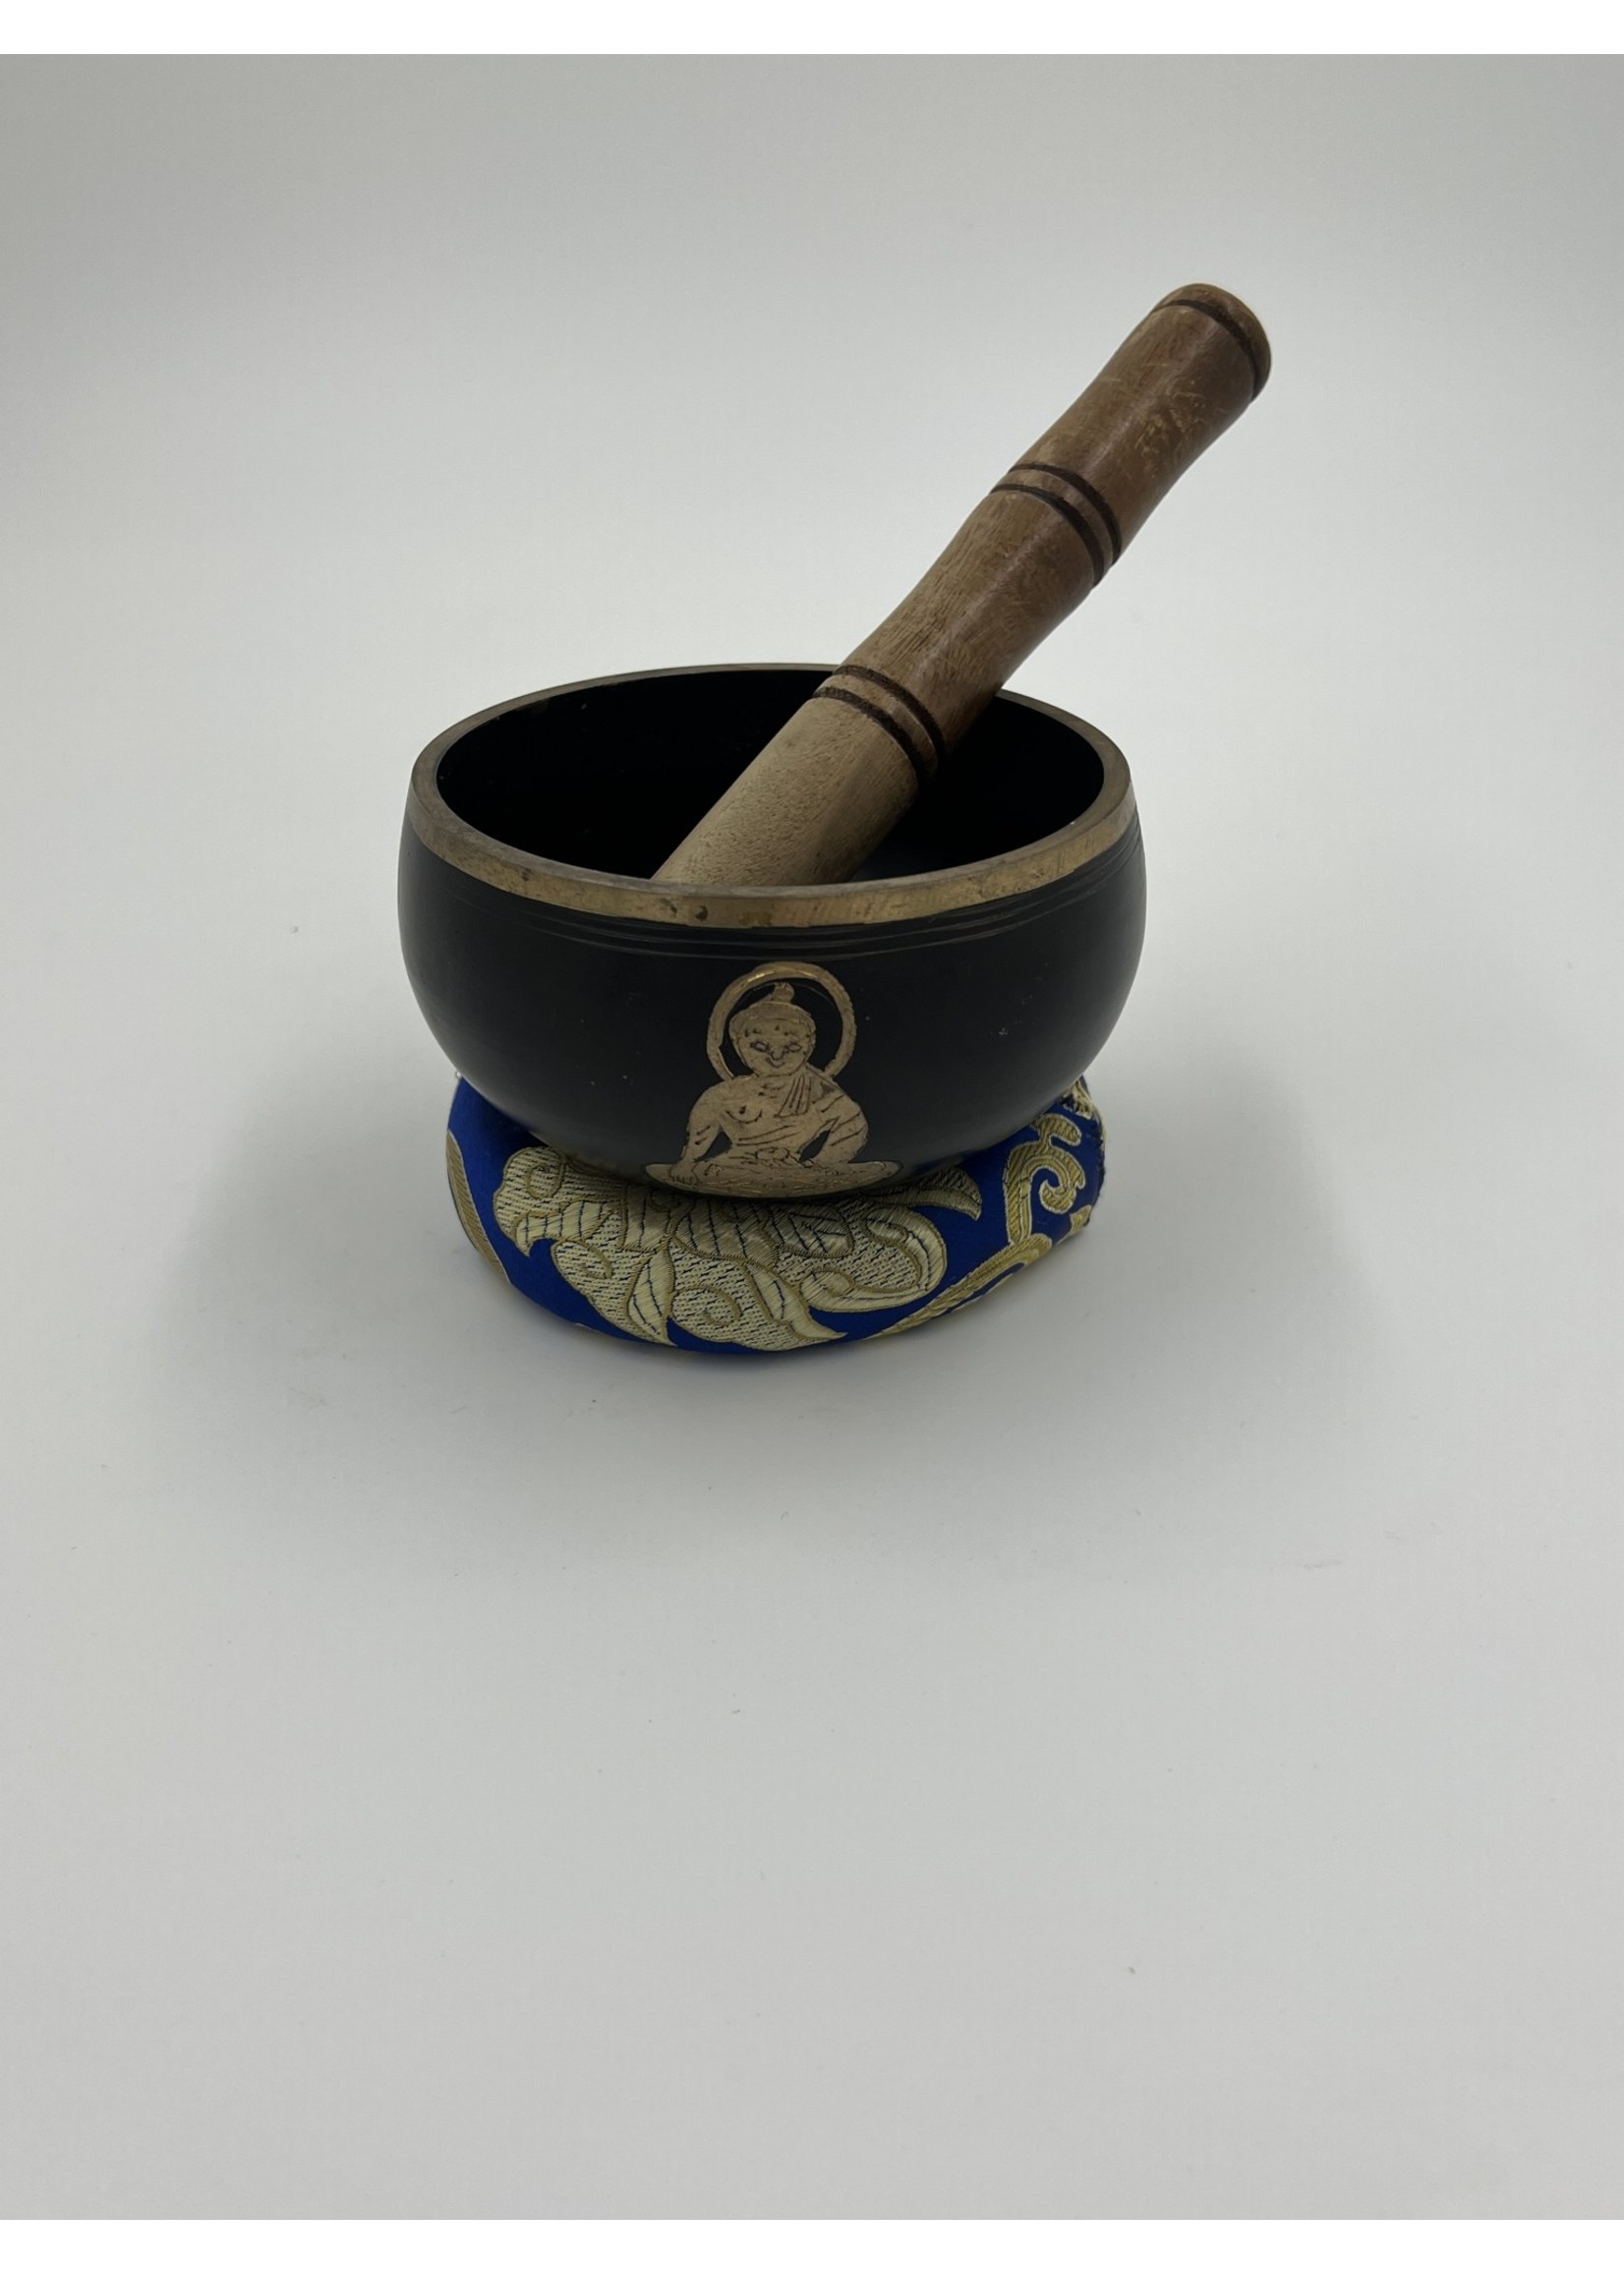 Other Things Himalayan Singing Bowl with Buddha Figure Design